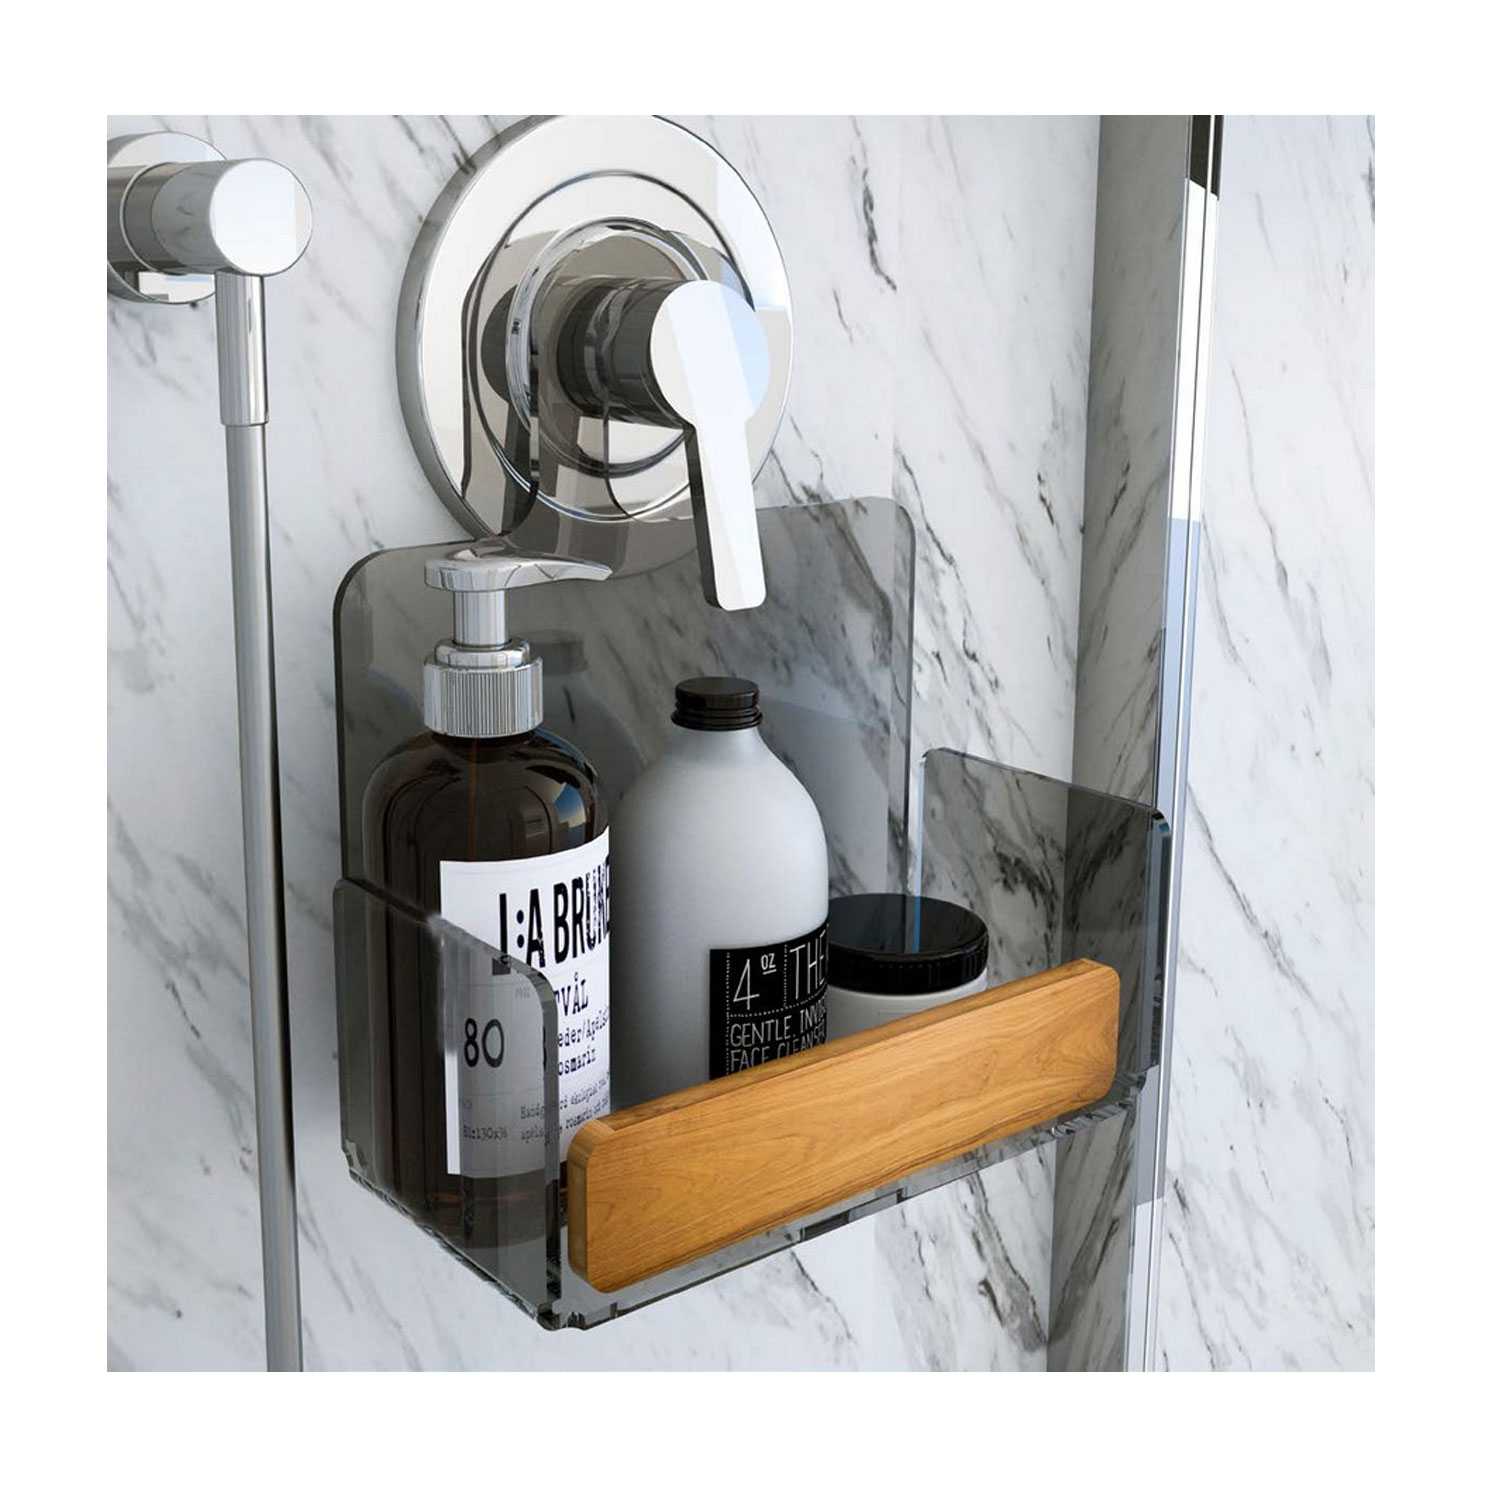 Door objects for shower faucet in transparent smoked Plexiglass